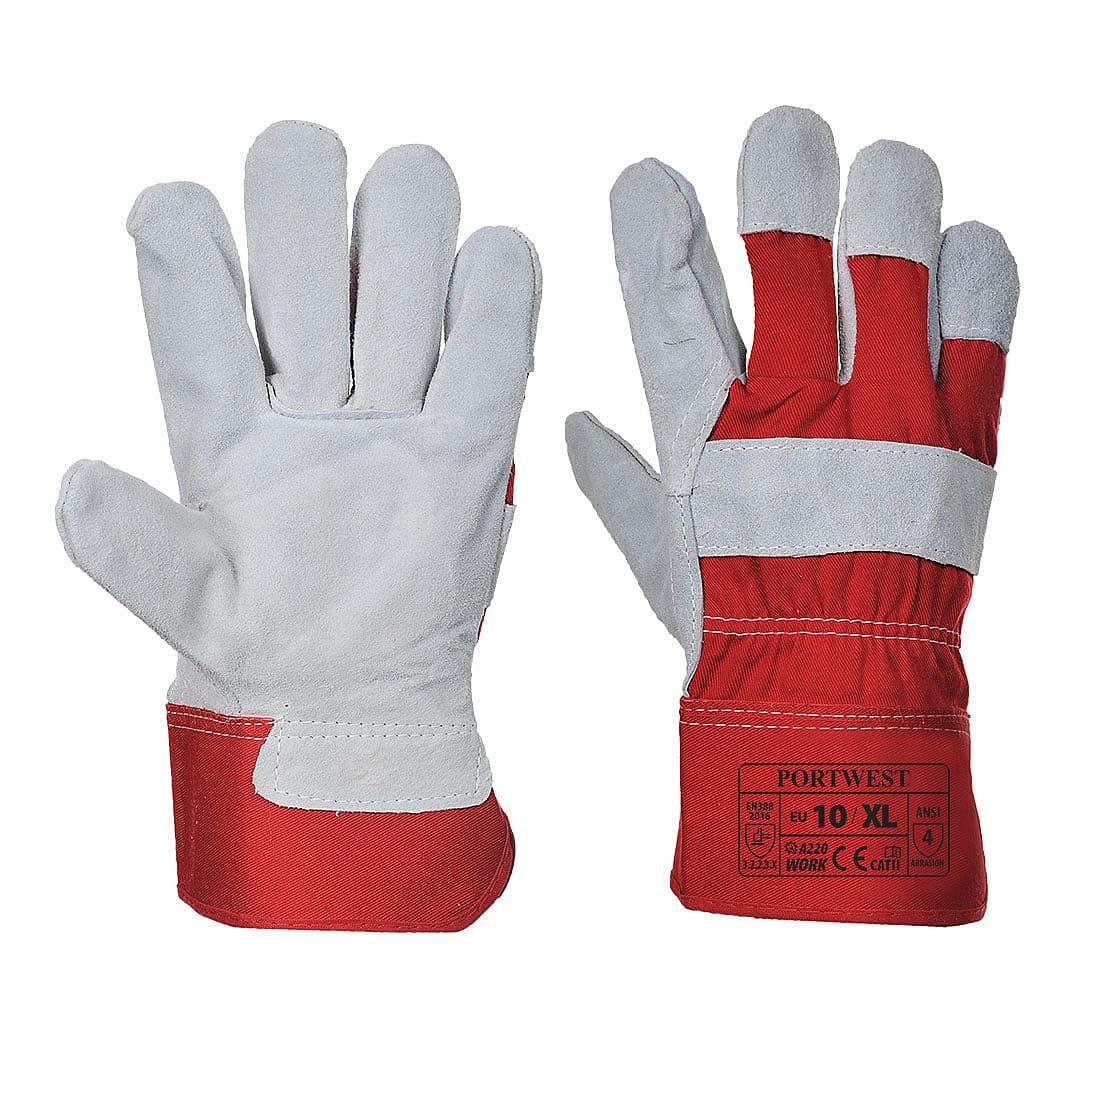 Portwest Premium Chrome Rigger Gloves in Red (Product Code: A220)